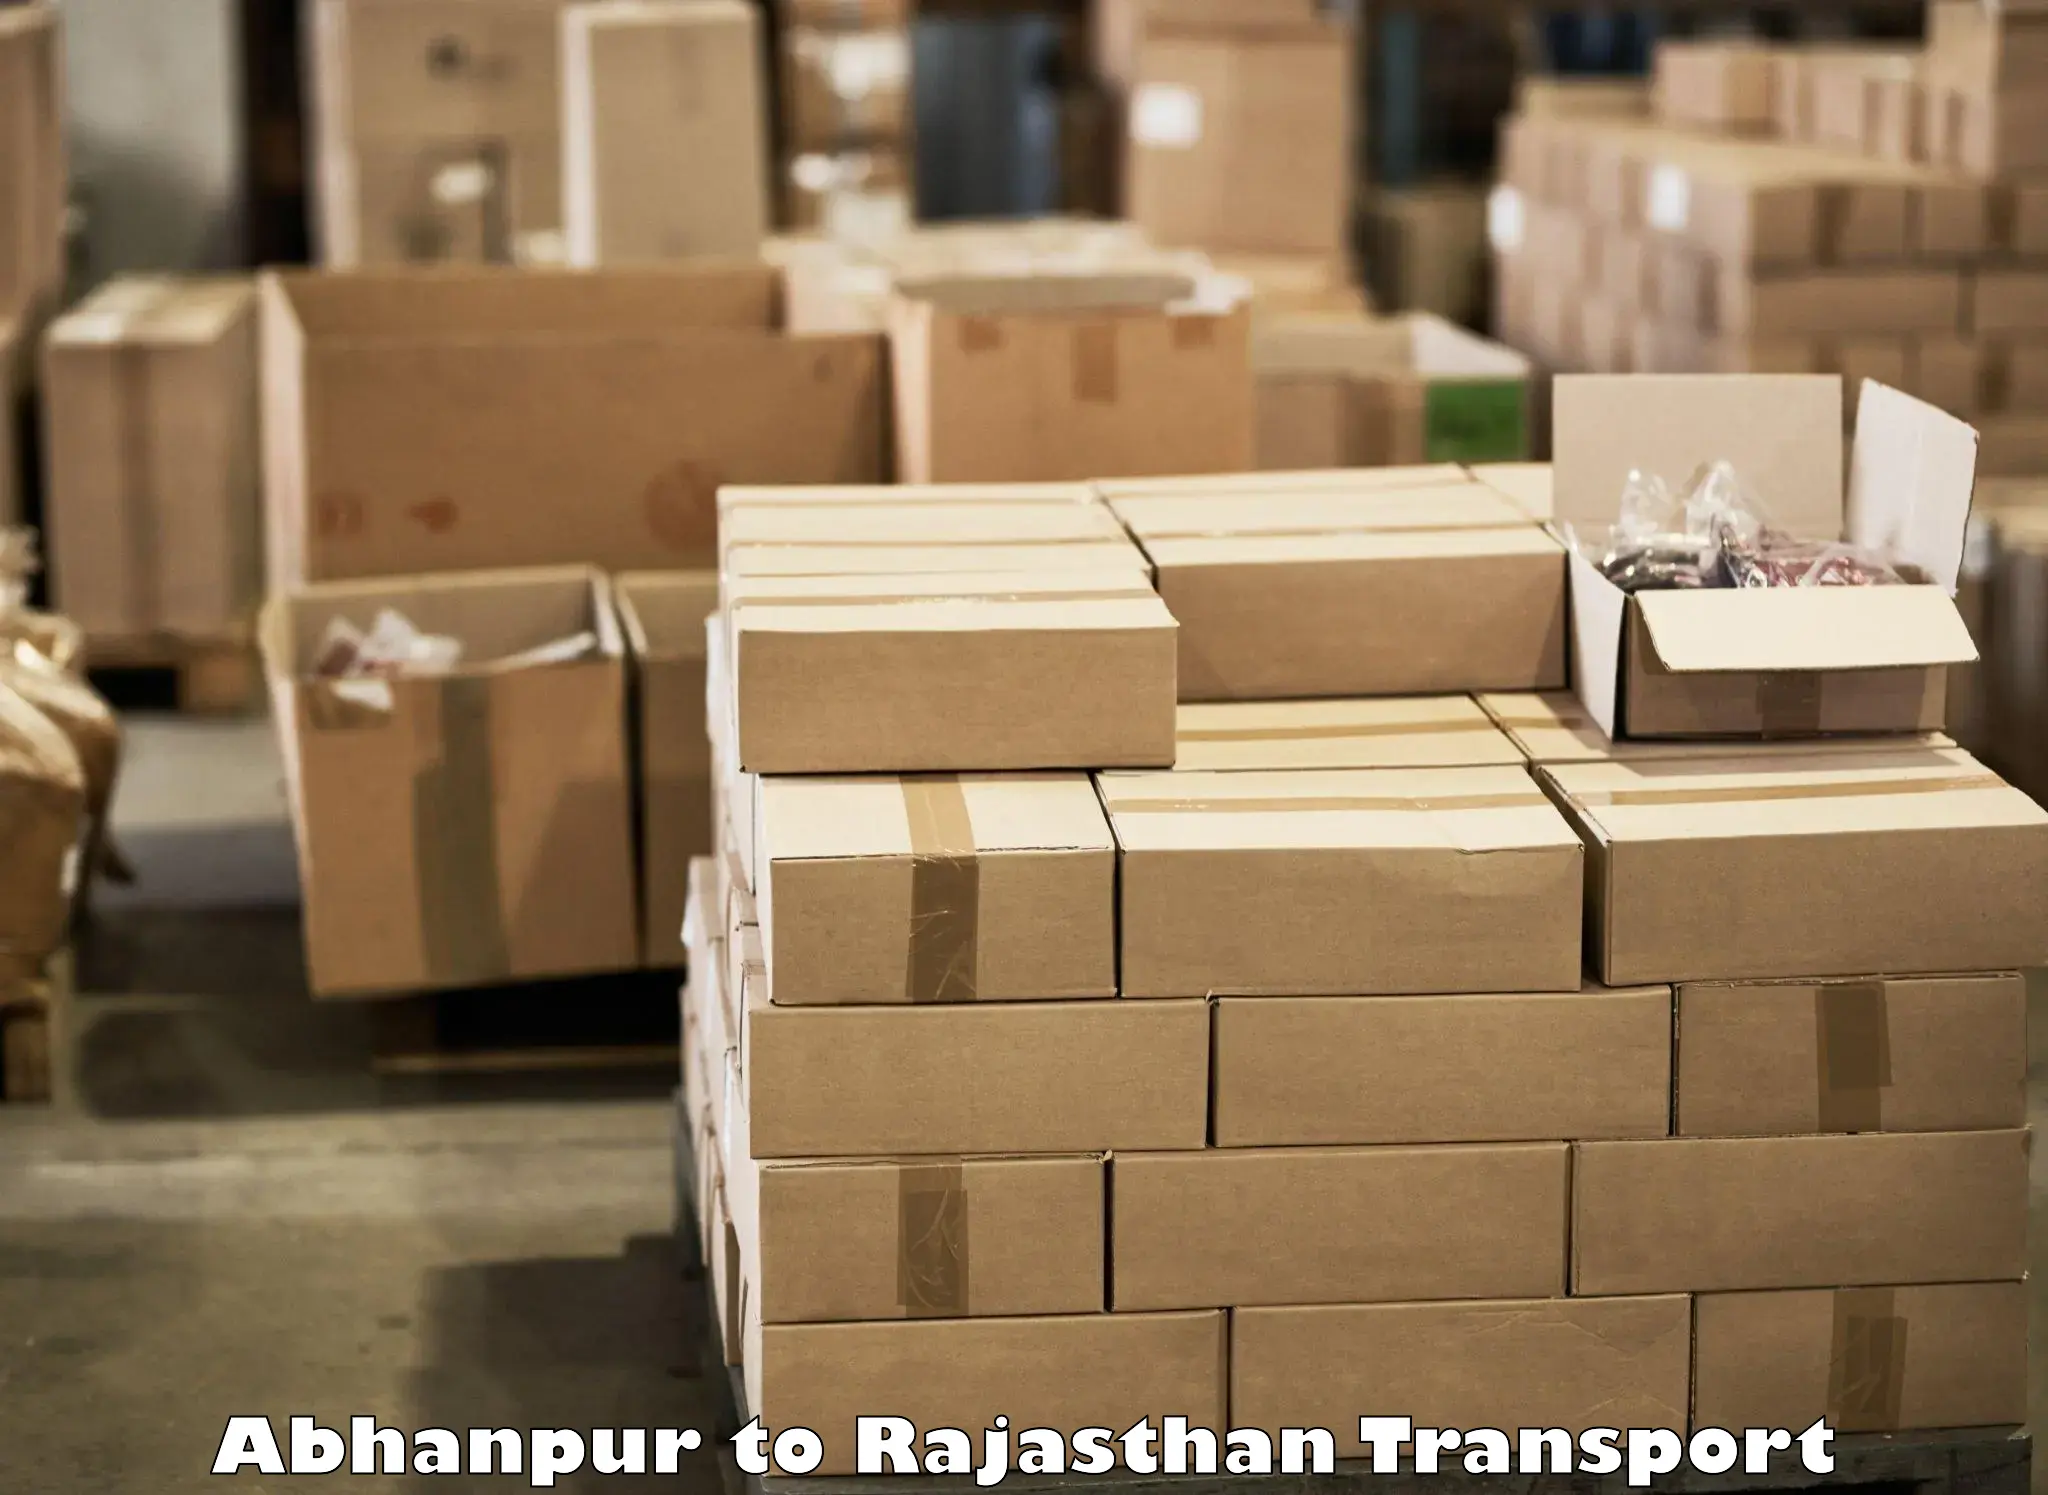 Interstate transport services Abhanpur to Bari Dholpur